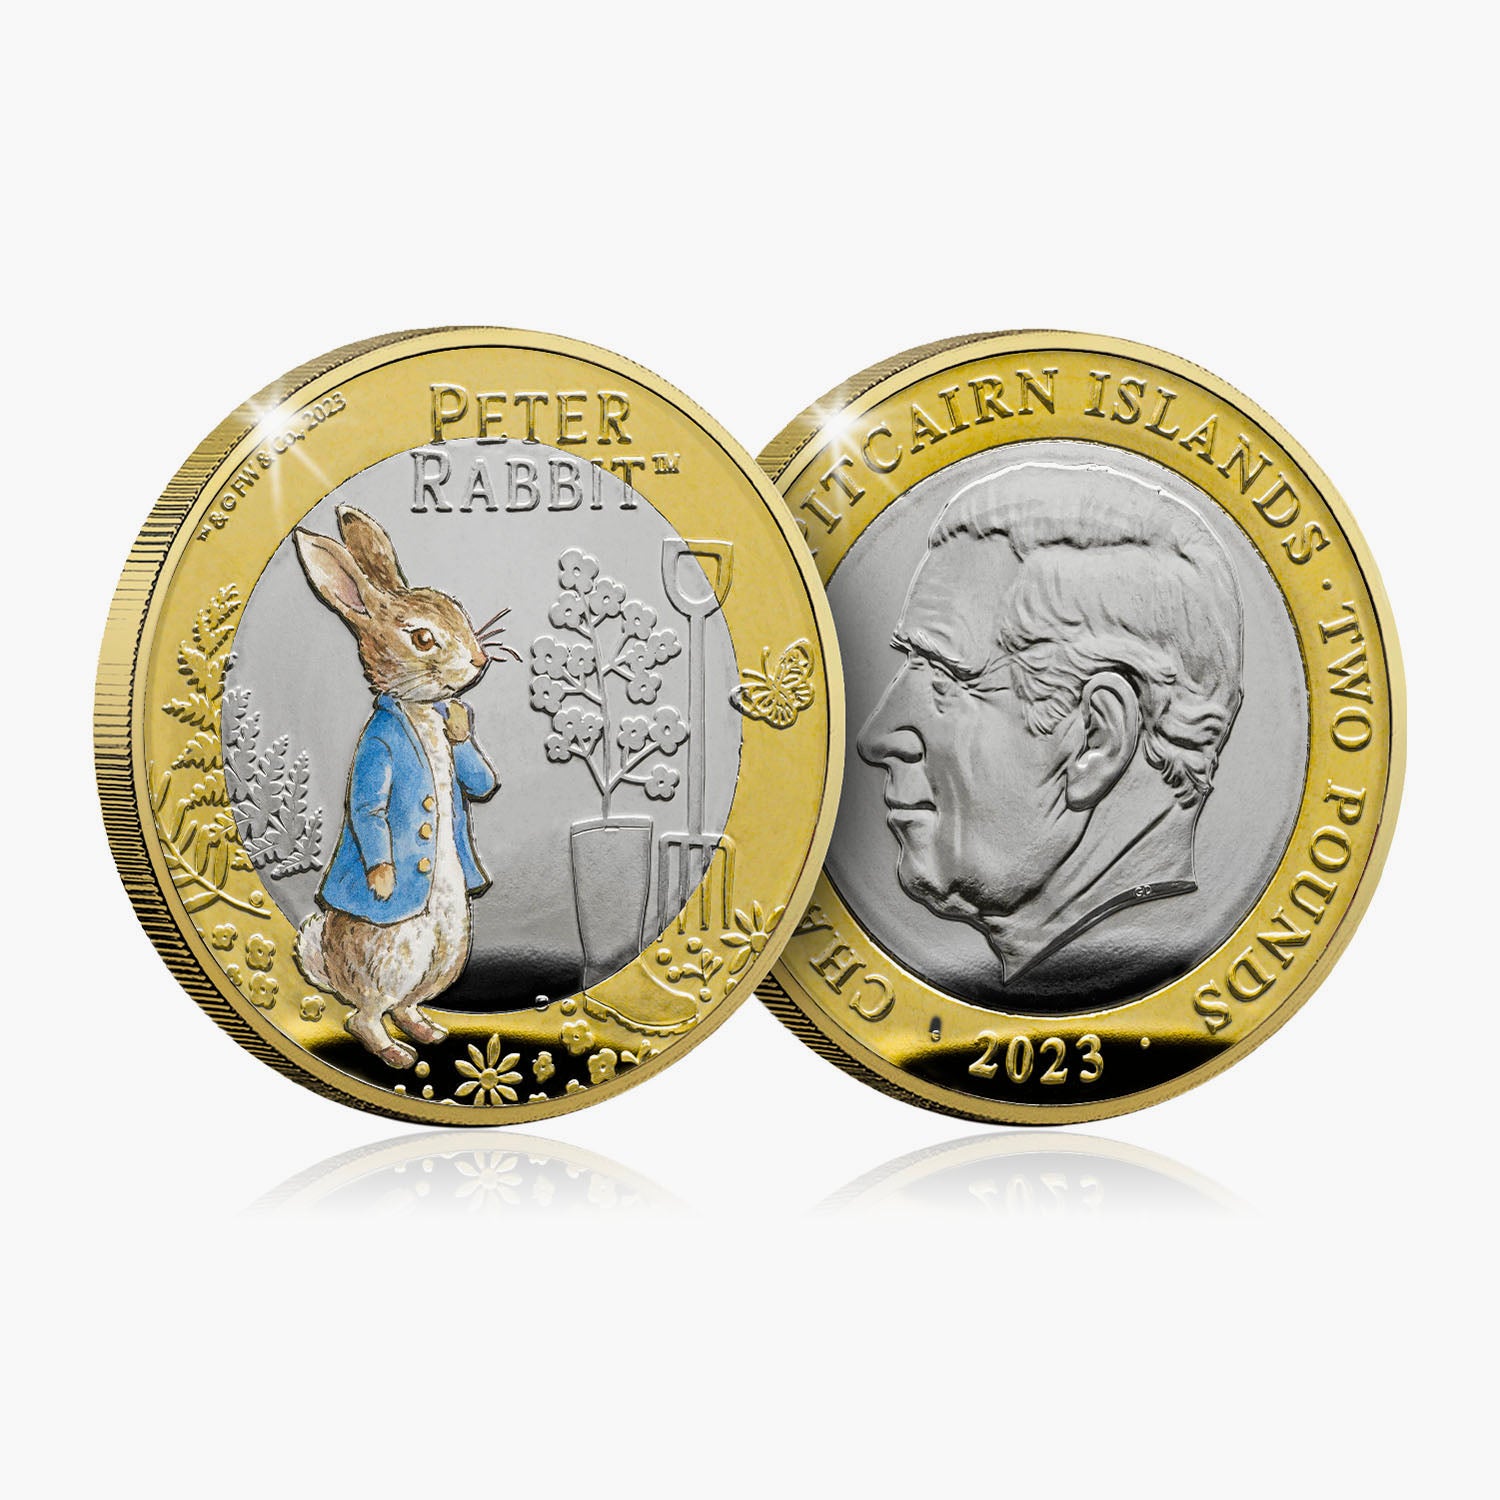 The World of Peter Rabbit 2023 Colour Coin Collection